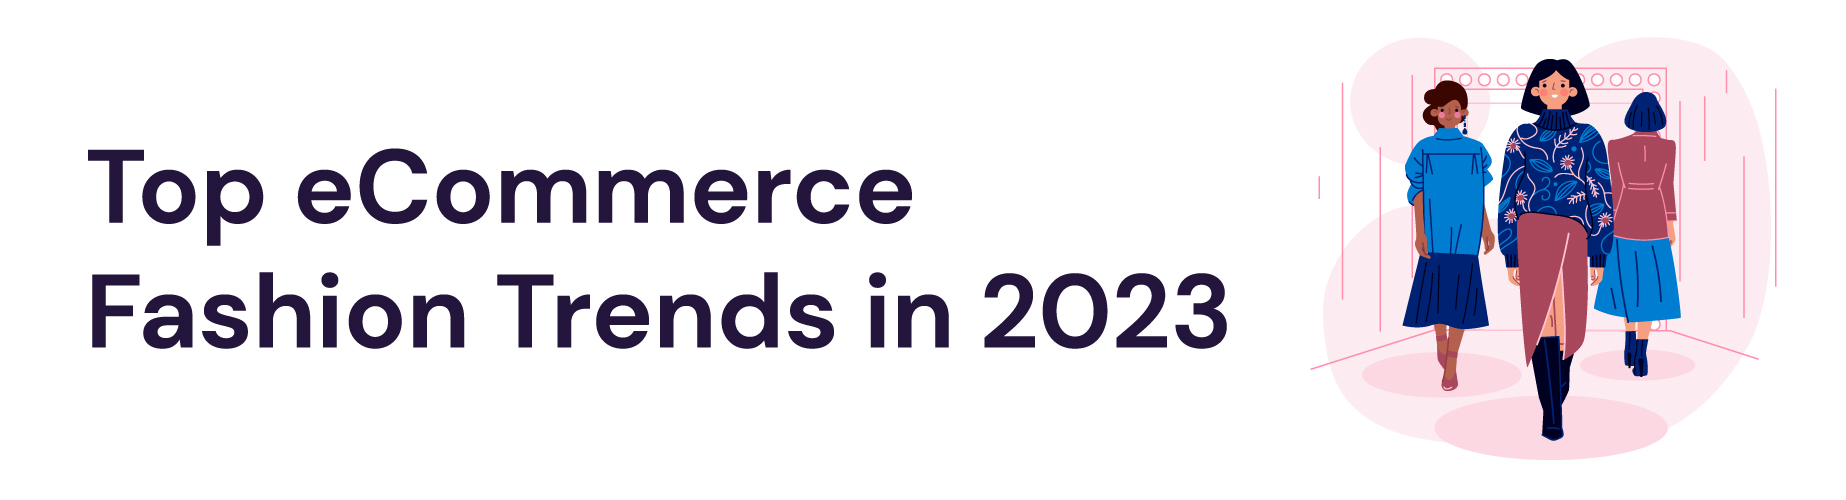 eCommerce Fashion Industry trends in 2023